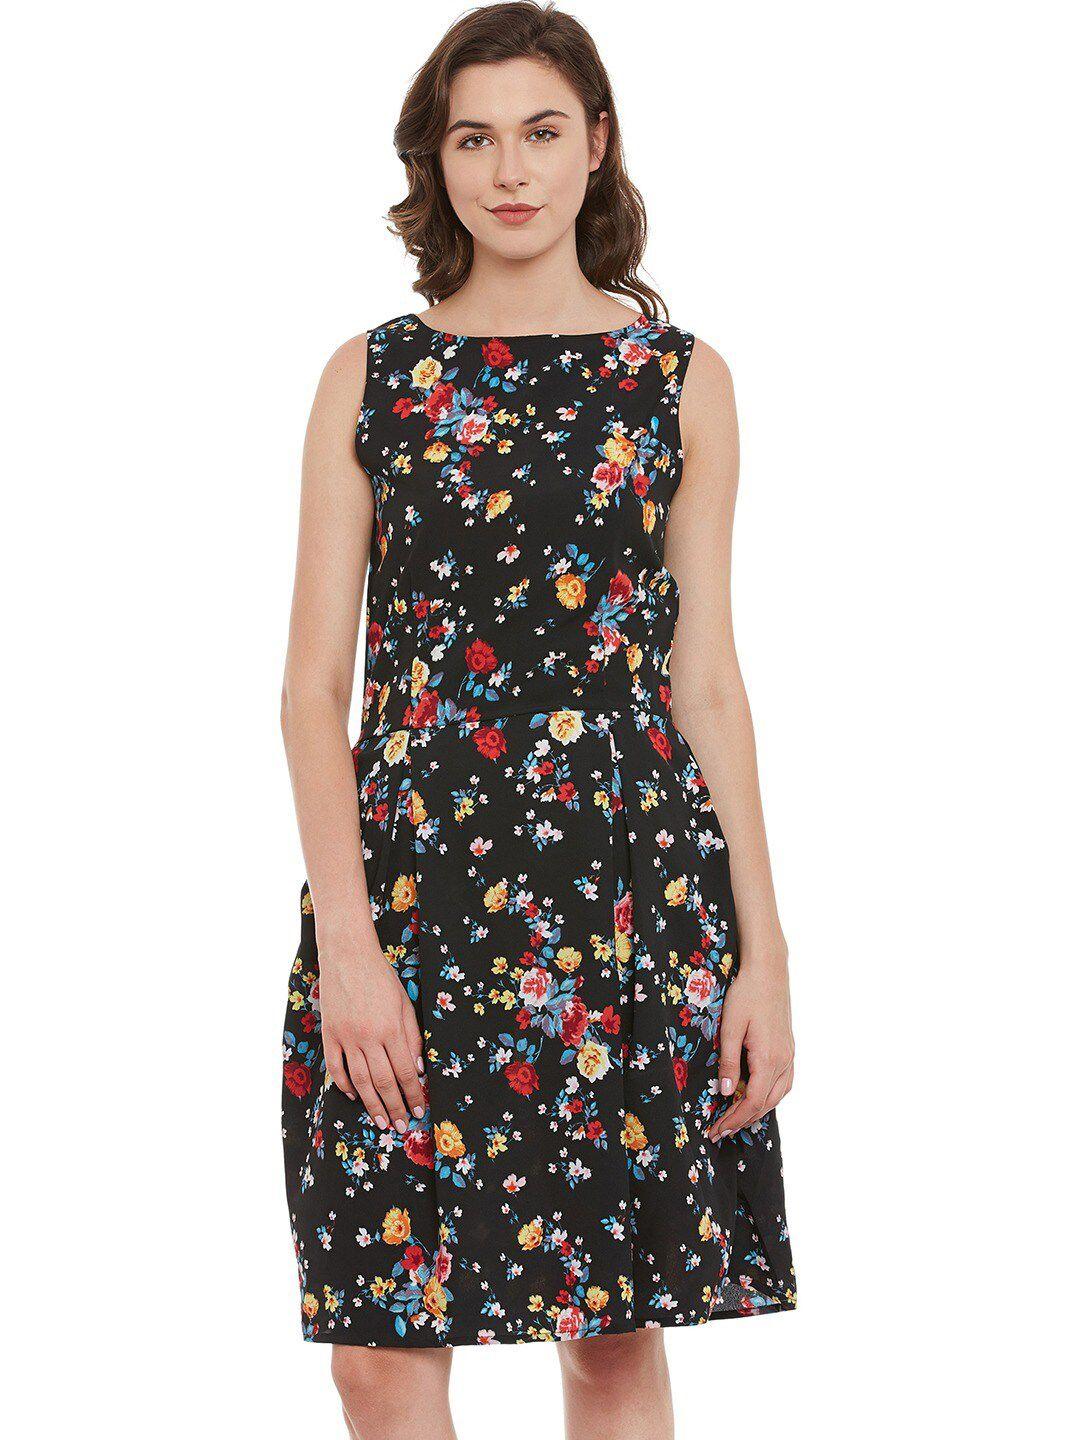 baesd floral printed boat neck a-line dress